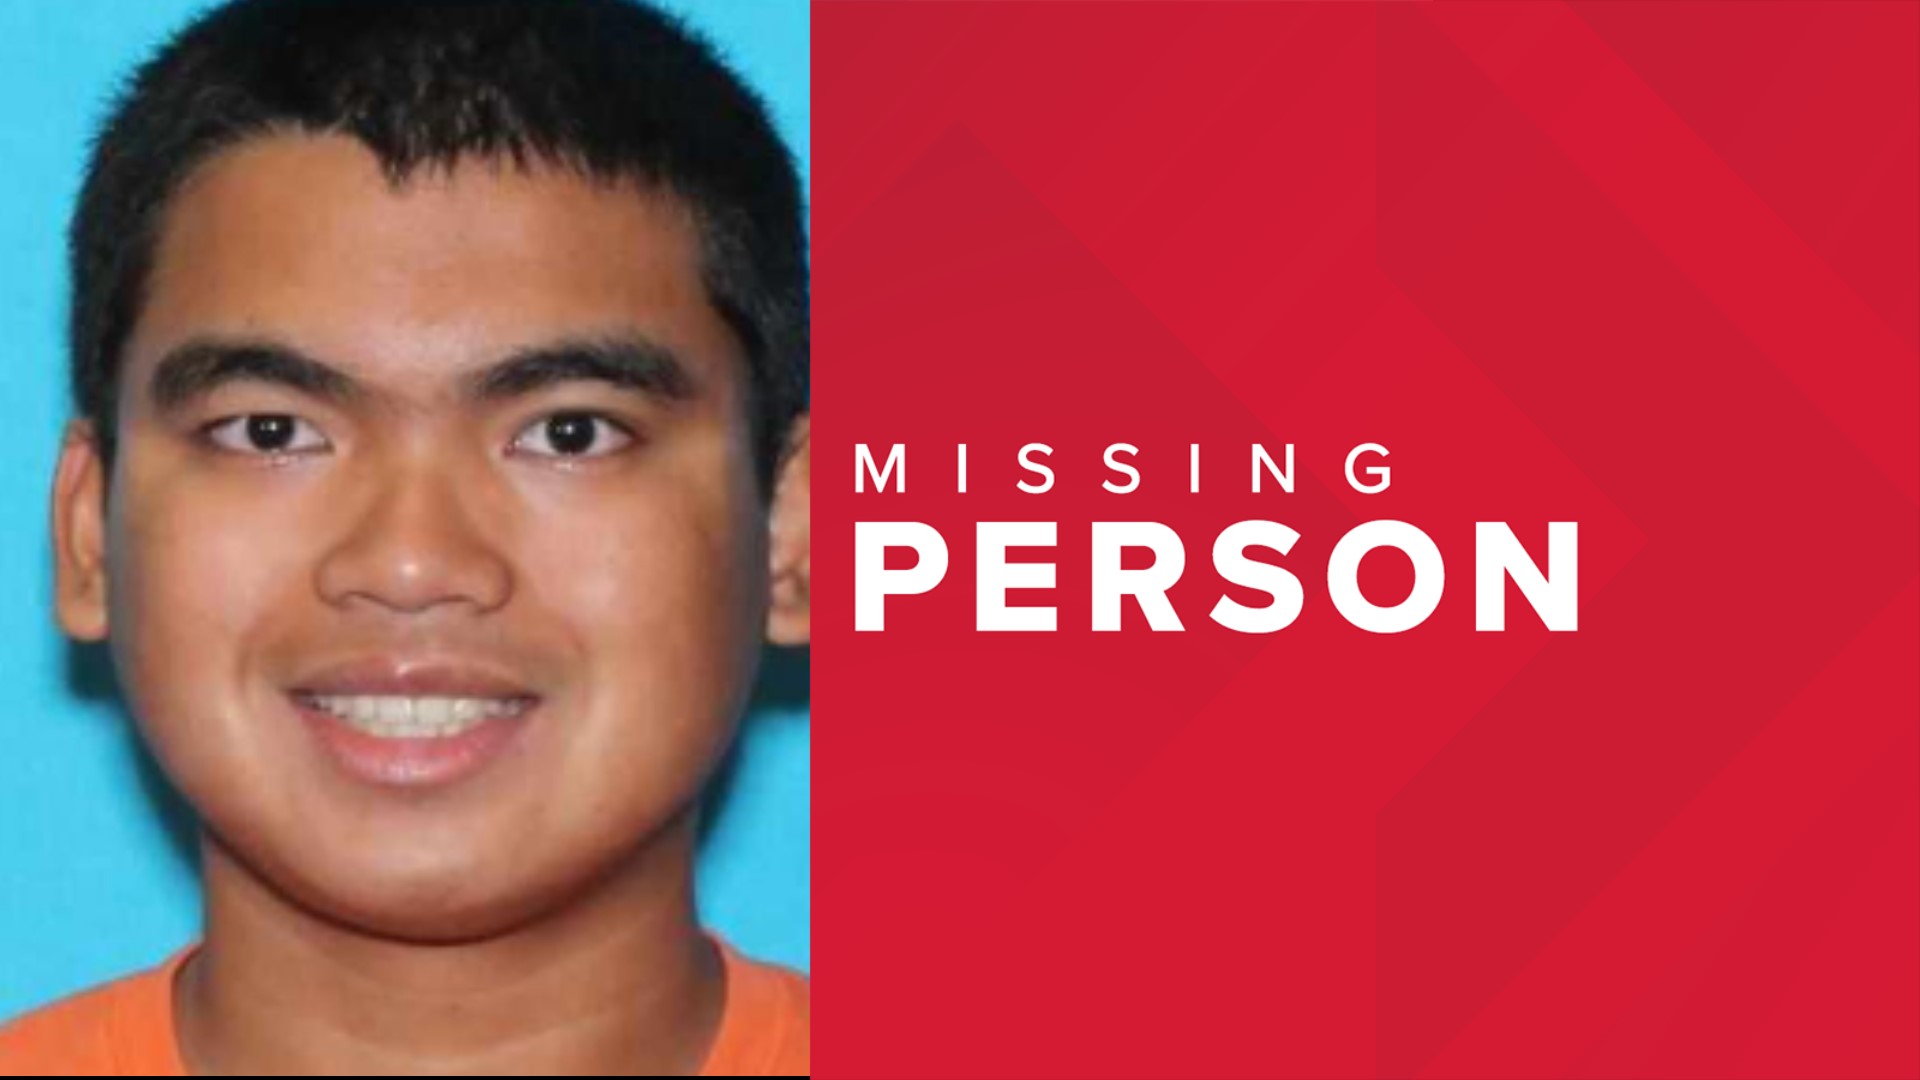 College Station Police said Adrian James Menorca Alambatin went missing around July 4 and was last seen on 1000 block of Guadalupe Drive.